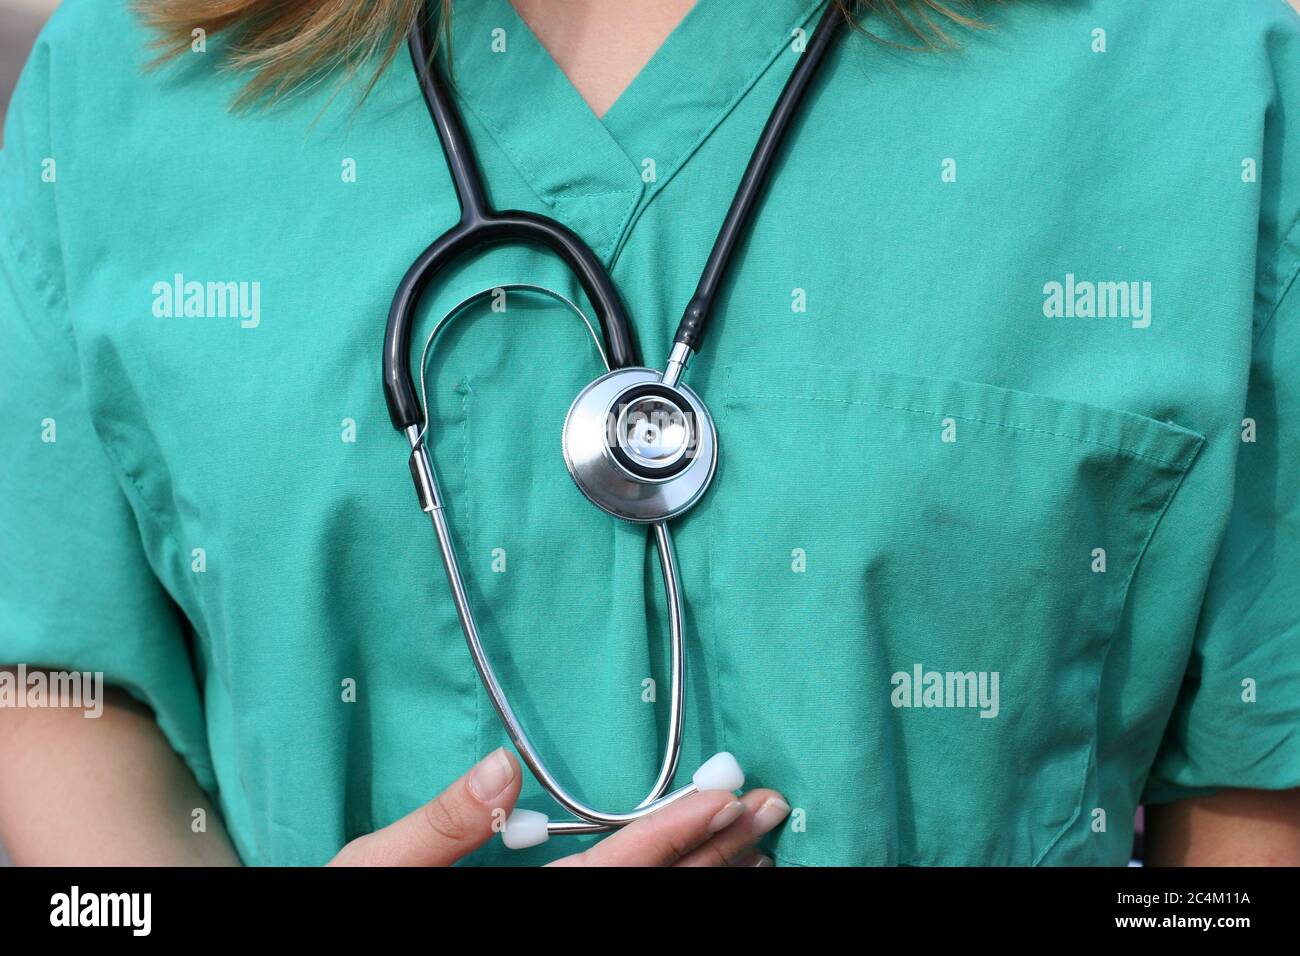 Medical nurse on checkup with green scrubs & medical stethoscope for heart health. Stock Photo